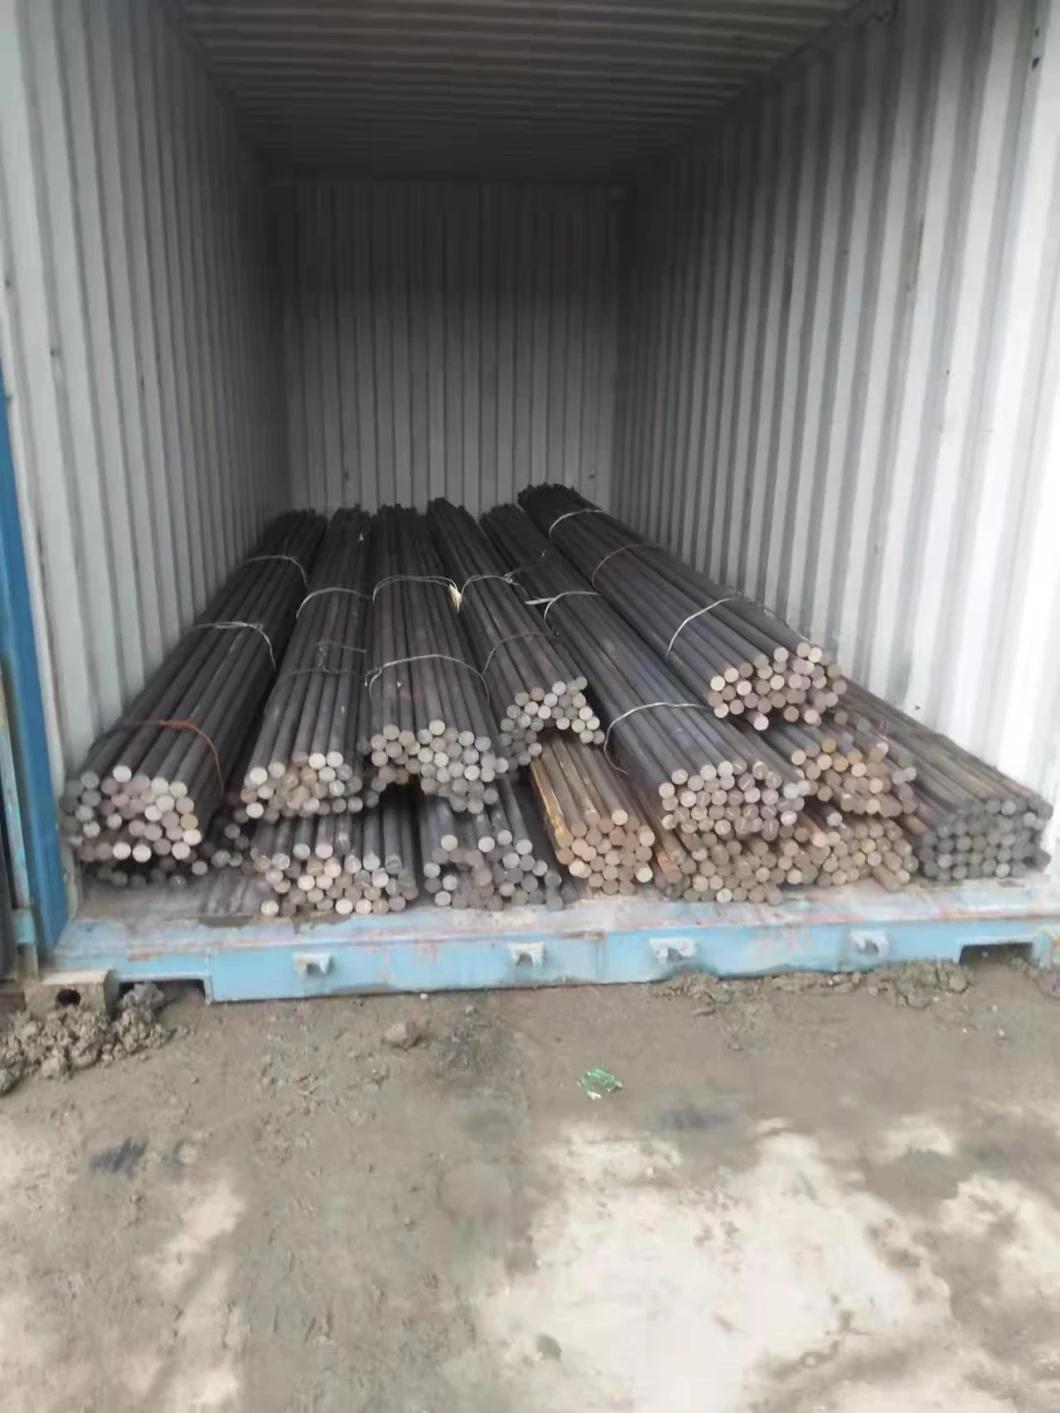 ASTM Ms 1020 1045 1050 C45 S40c S45c S25c S20c 20# 4140 Carbon Steel Round Bar Steel Rod Price with Cutting Service